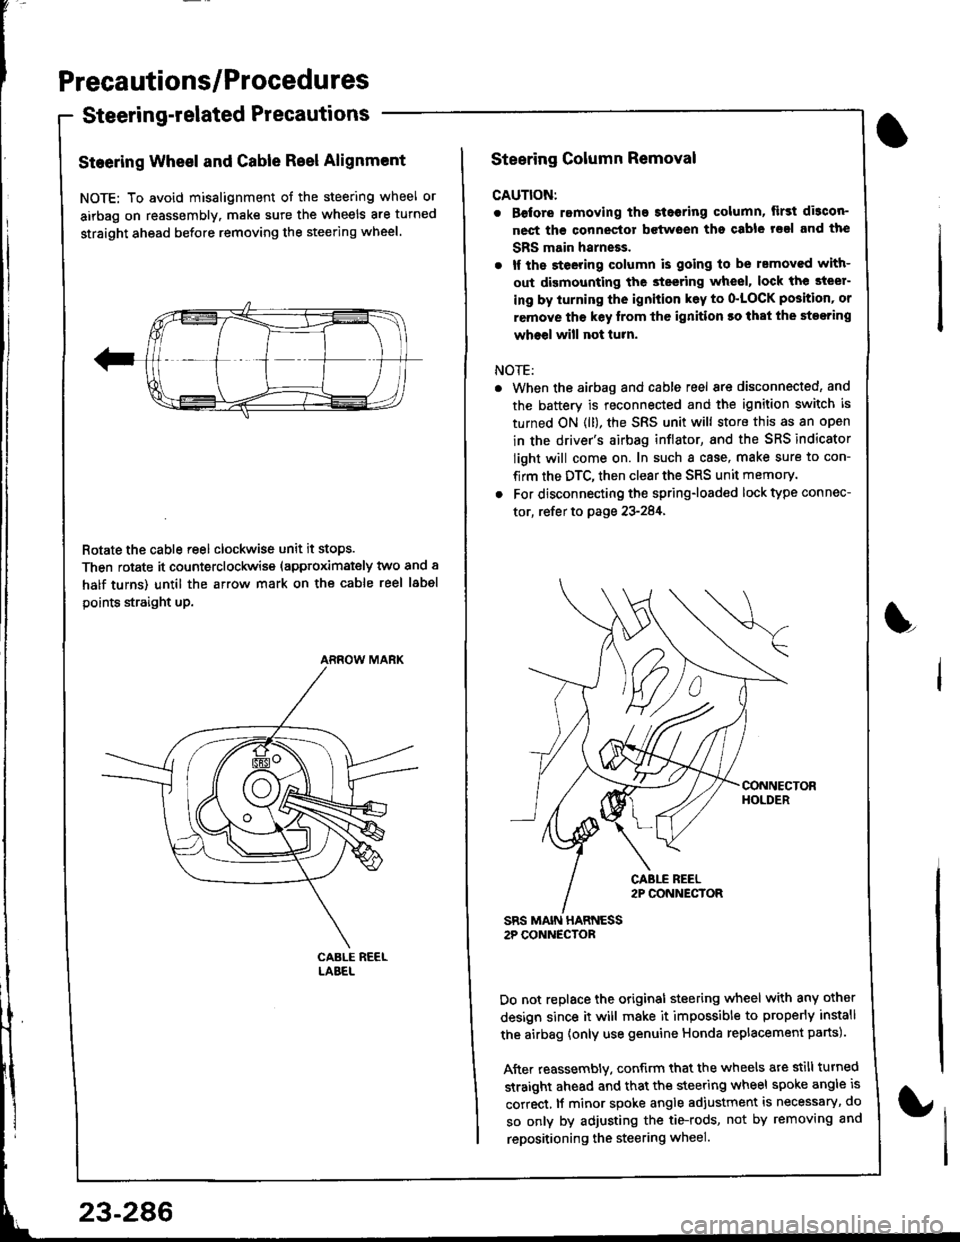 ACURA INTEGRA 1998  Service Repair Manual Precautions/Procedures
Steering-related Precautions
Steering Wheel and Gable Reel Alignment
NOTE: To avoid misalignment of the steering wheel or
airbag on reassembly. make sure the wheels are turned
s